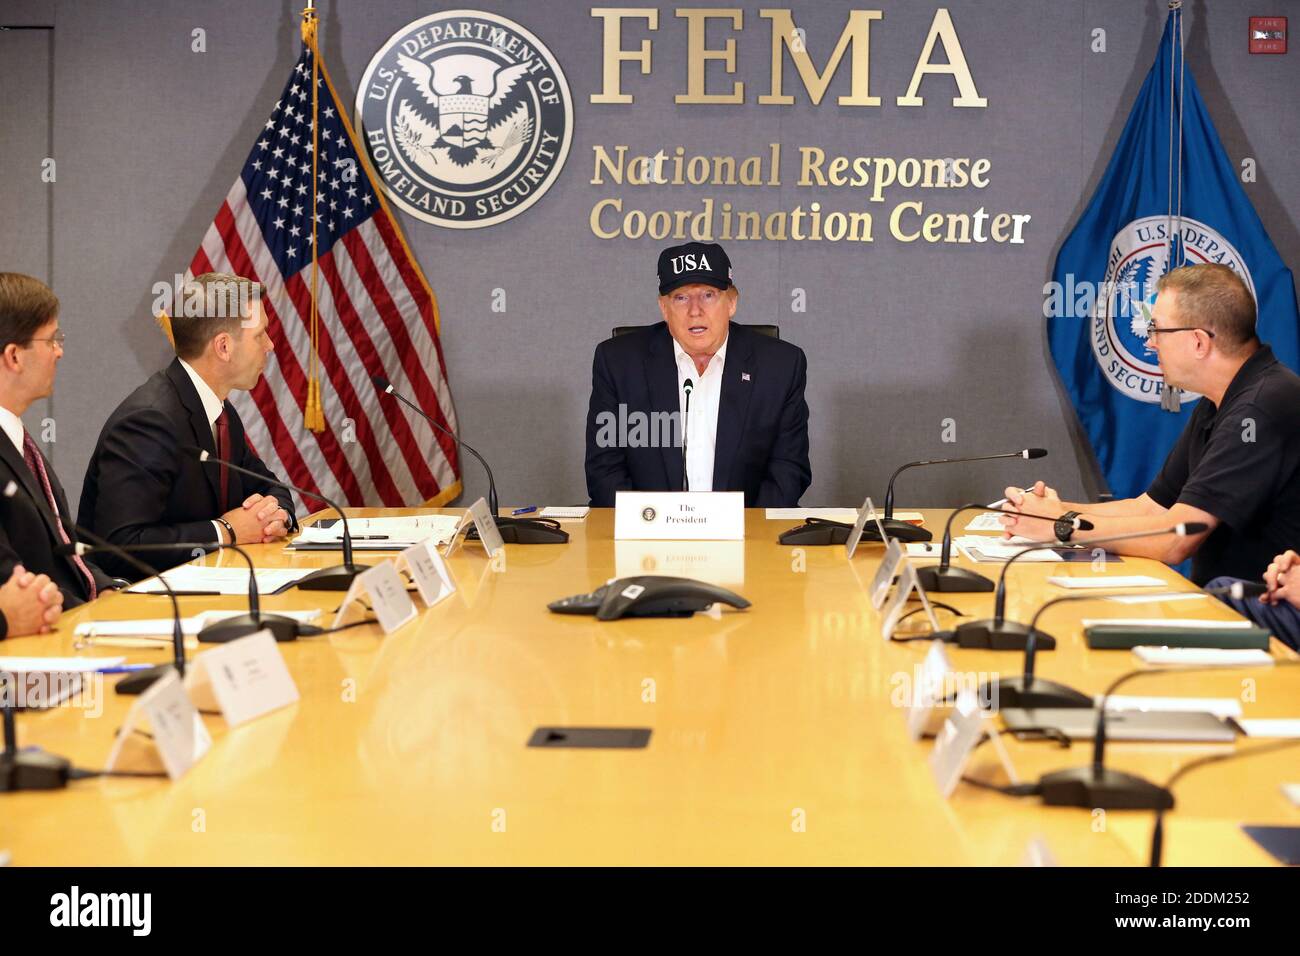 President Donald J. Trump attends a briefing on Hurricane Dorian at FEMA headquarters, in Washington, DC, USA, September 1, 2019. Also shown (l-r) are Defense Secretary Mark Esper, Kevin McAleenan, Acting Secretary of Homeland Security, and Pete Gaynor, Acting Director of FEMA. Photo by Martin H. Simon/Pool/ABACAPRESS.COM Stock Photo